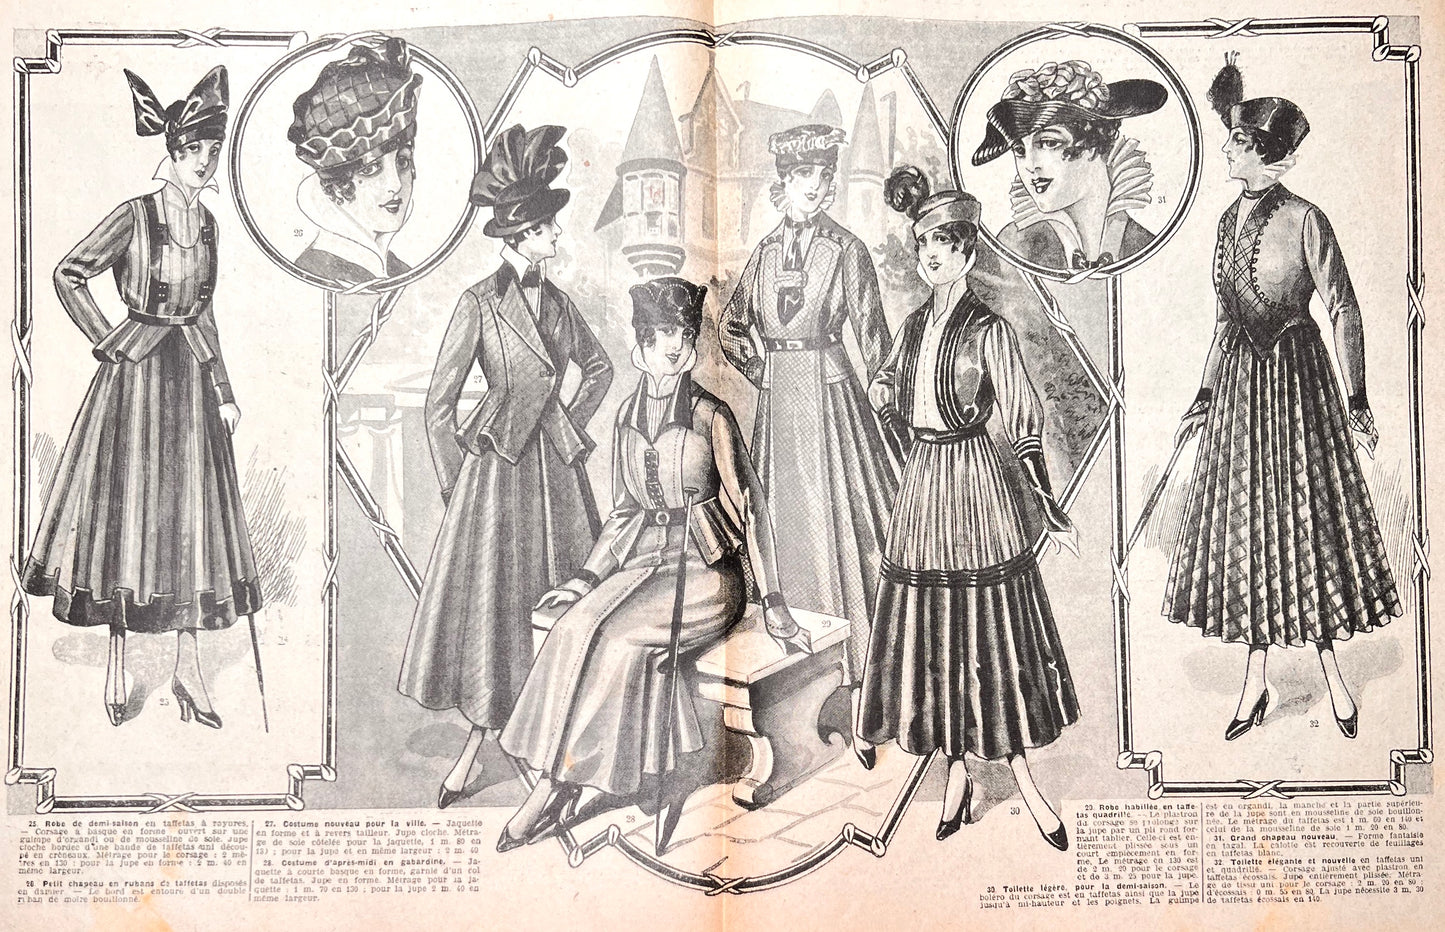 Fashion and Crafts in April 1916 French Magazine La Mode. Issue No.14